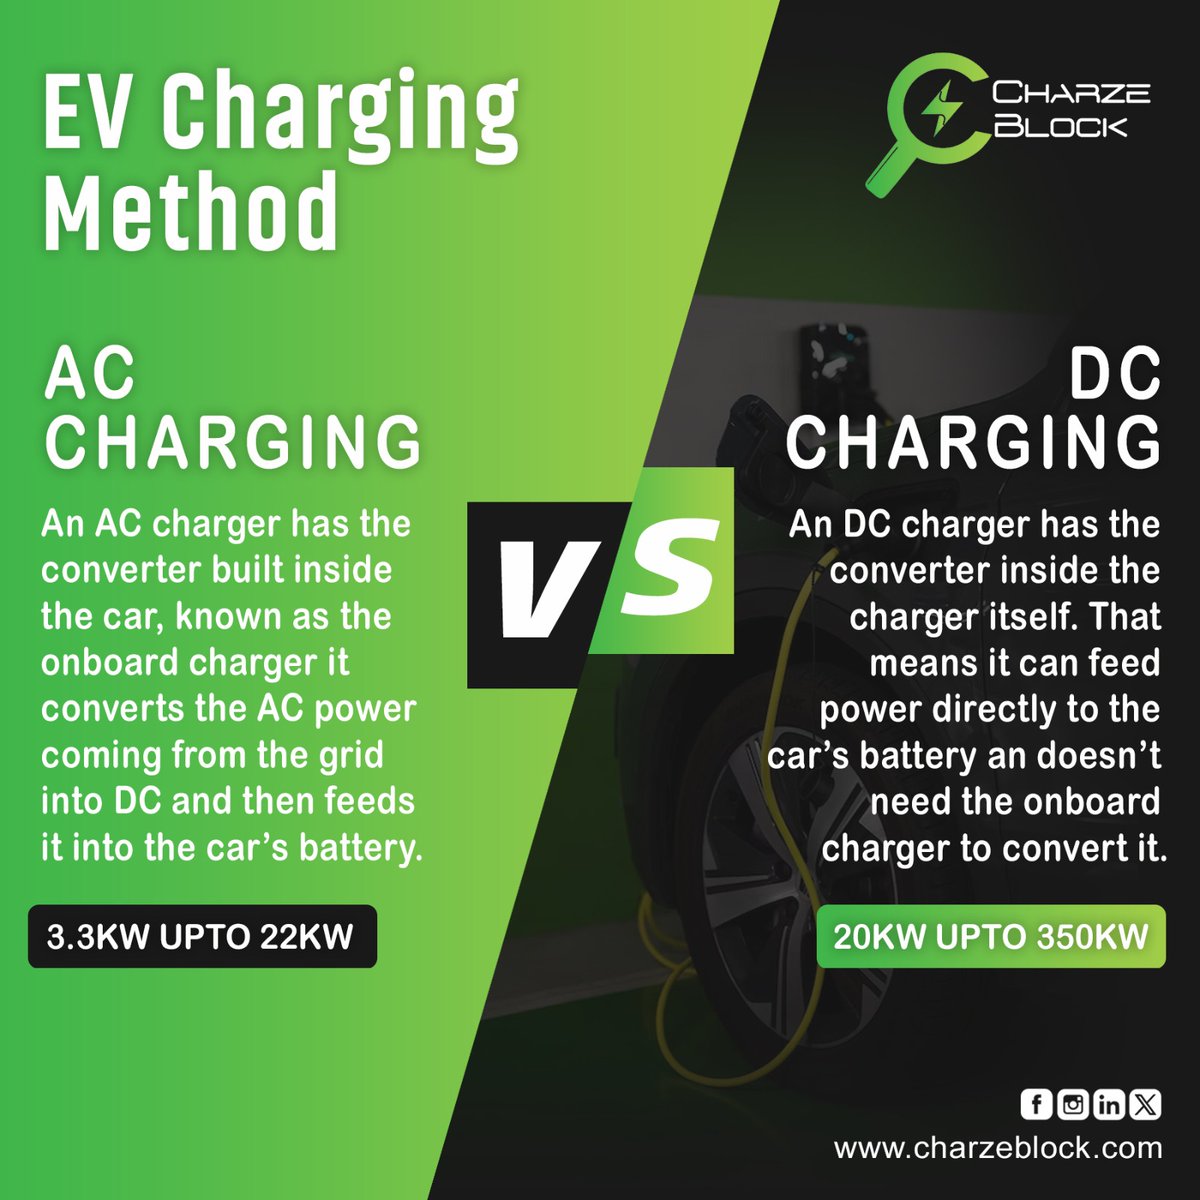 #EVCharging: AC Charging vs. DC Charging ⚡
Choose the right charge for your electric vehicle journey. AC charging for convenience, or DC charging for speed? Let's explore your options! 🚗⚡ 
#ElectricVehicle #Sustainability #Charzeblock #EcoFriendly #DriveElectric #ZeroEmissions